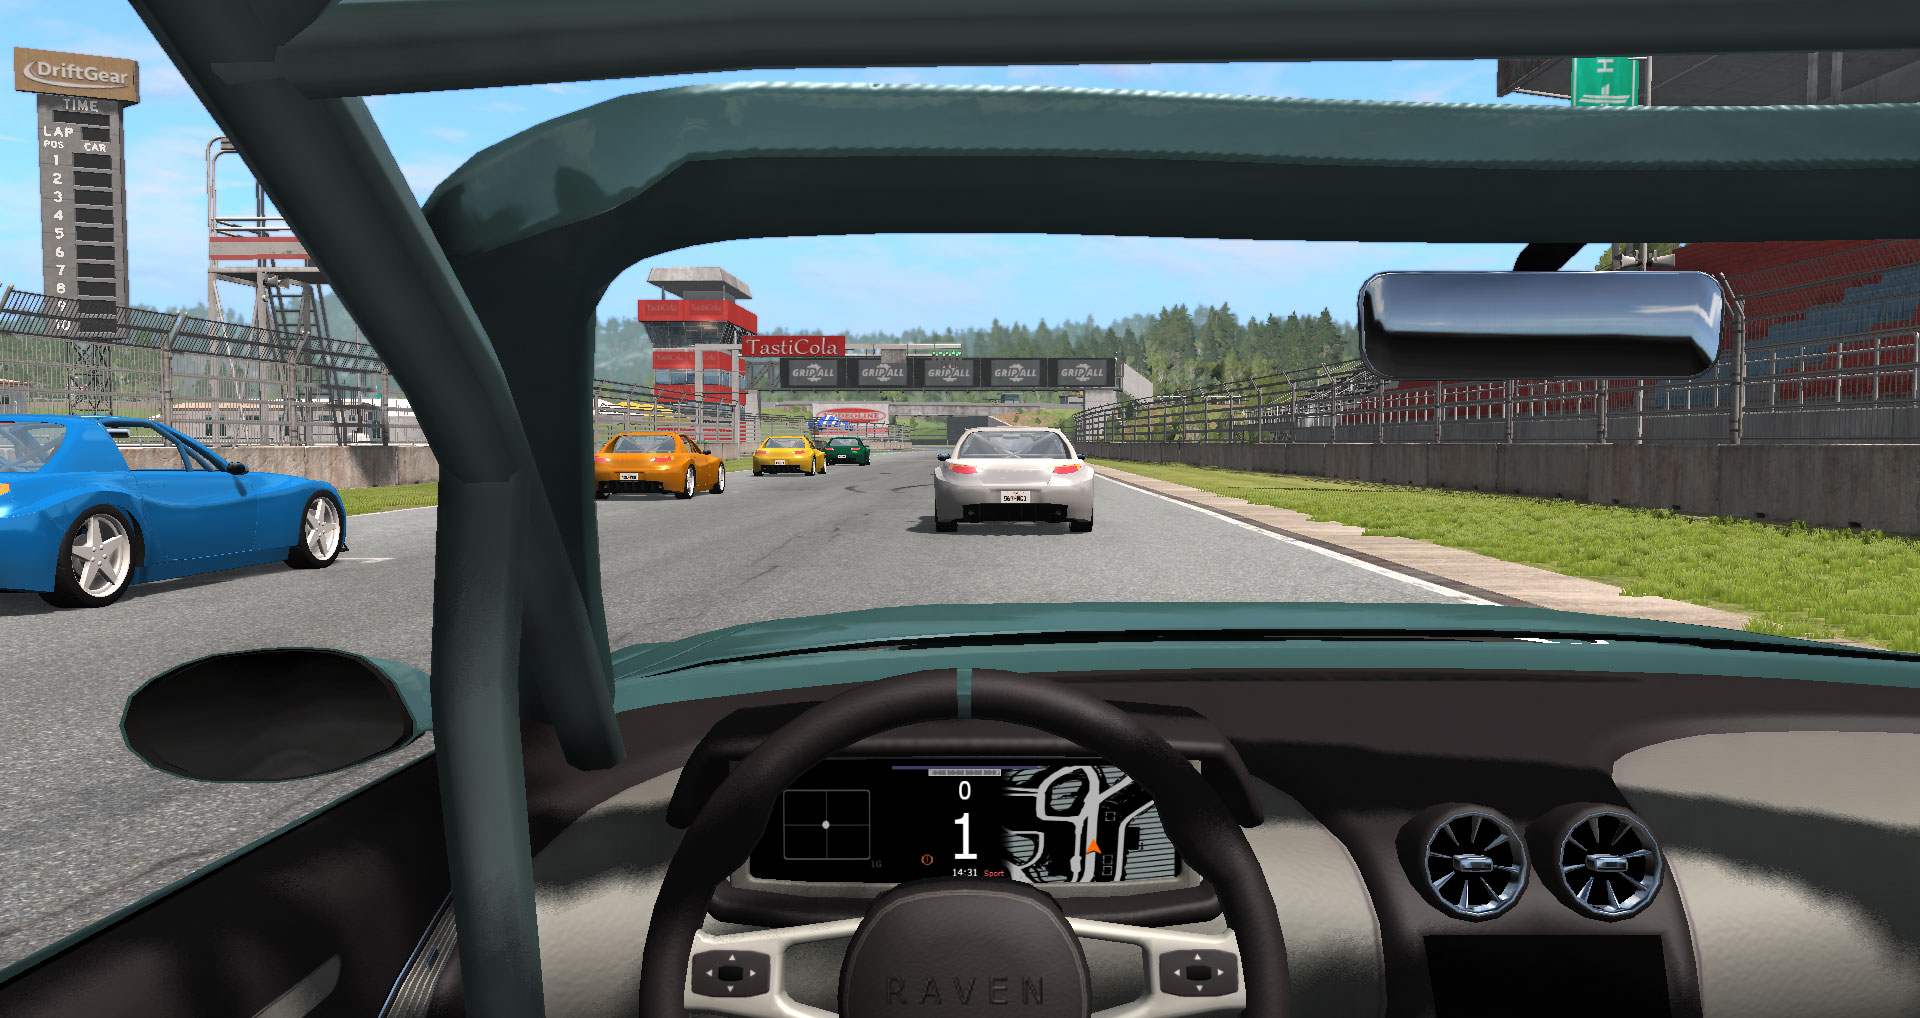 The racegrid from a different viewpoint, where the camera is placed in a first person position from the last car on the grid.